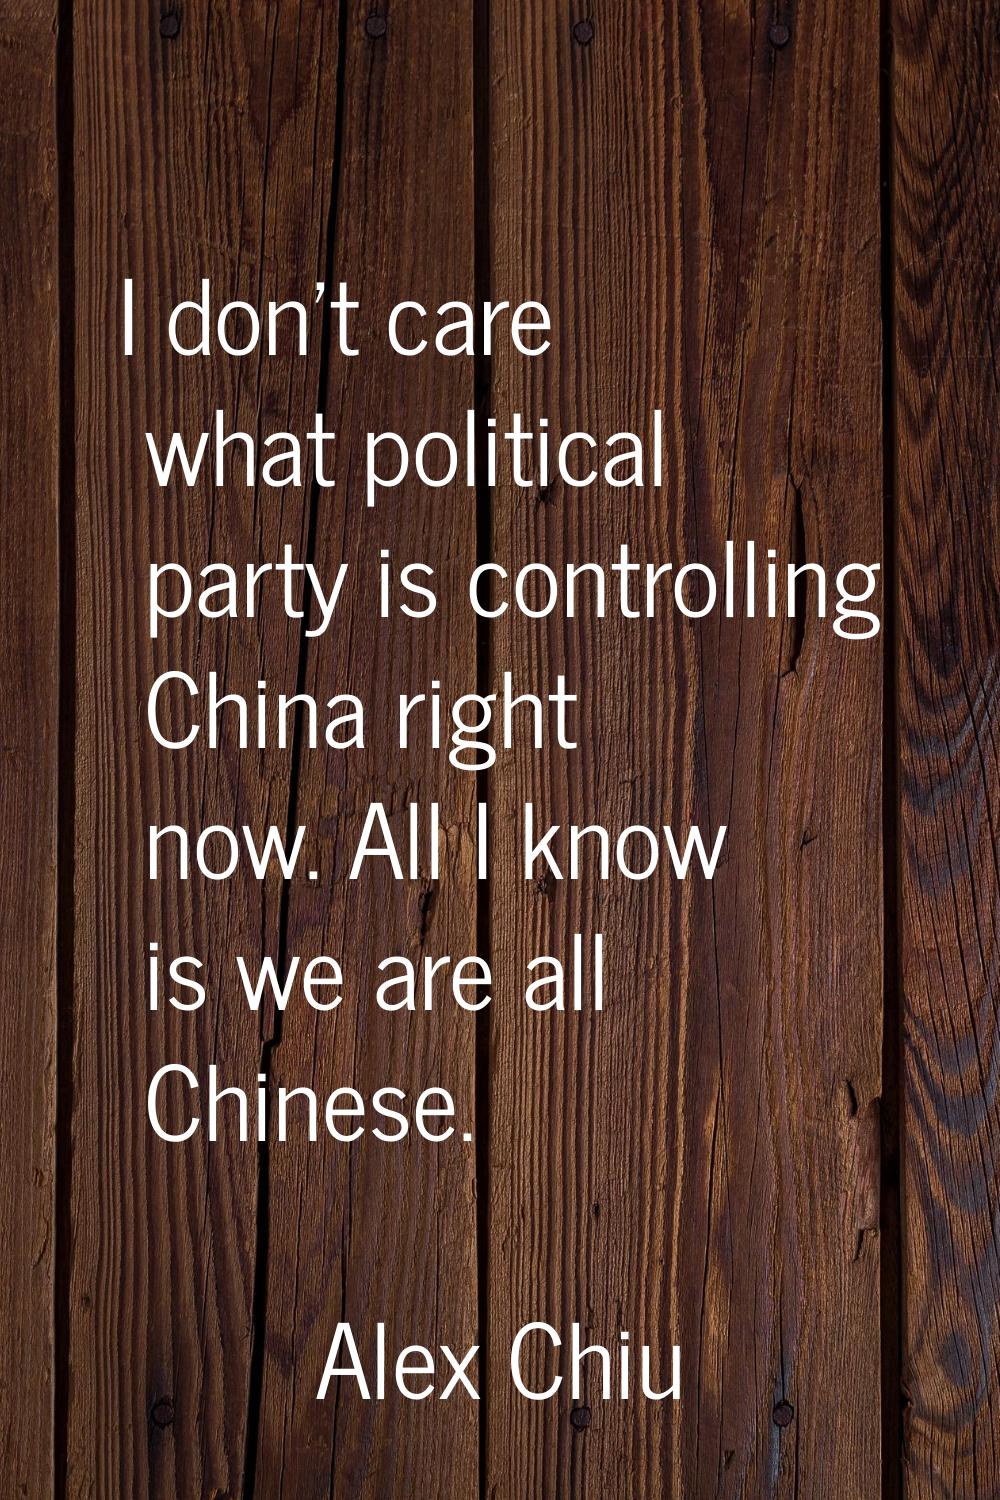 I don't care what political party is controlling China right now. All I know is we are all Chinese.